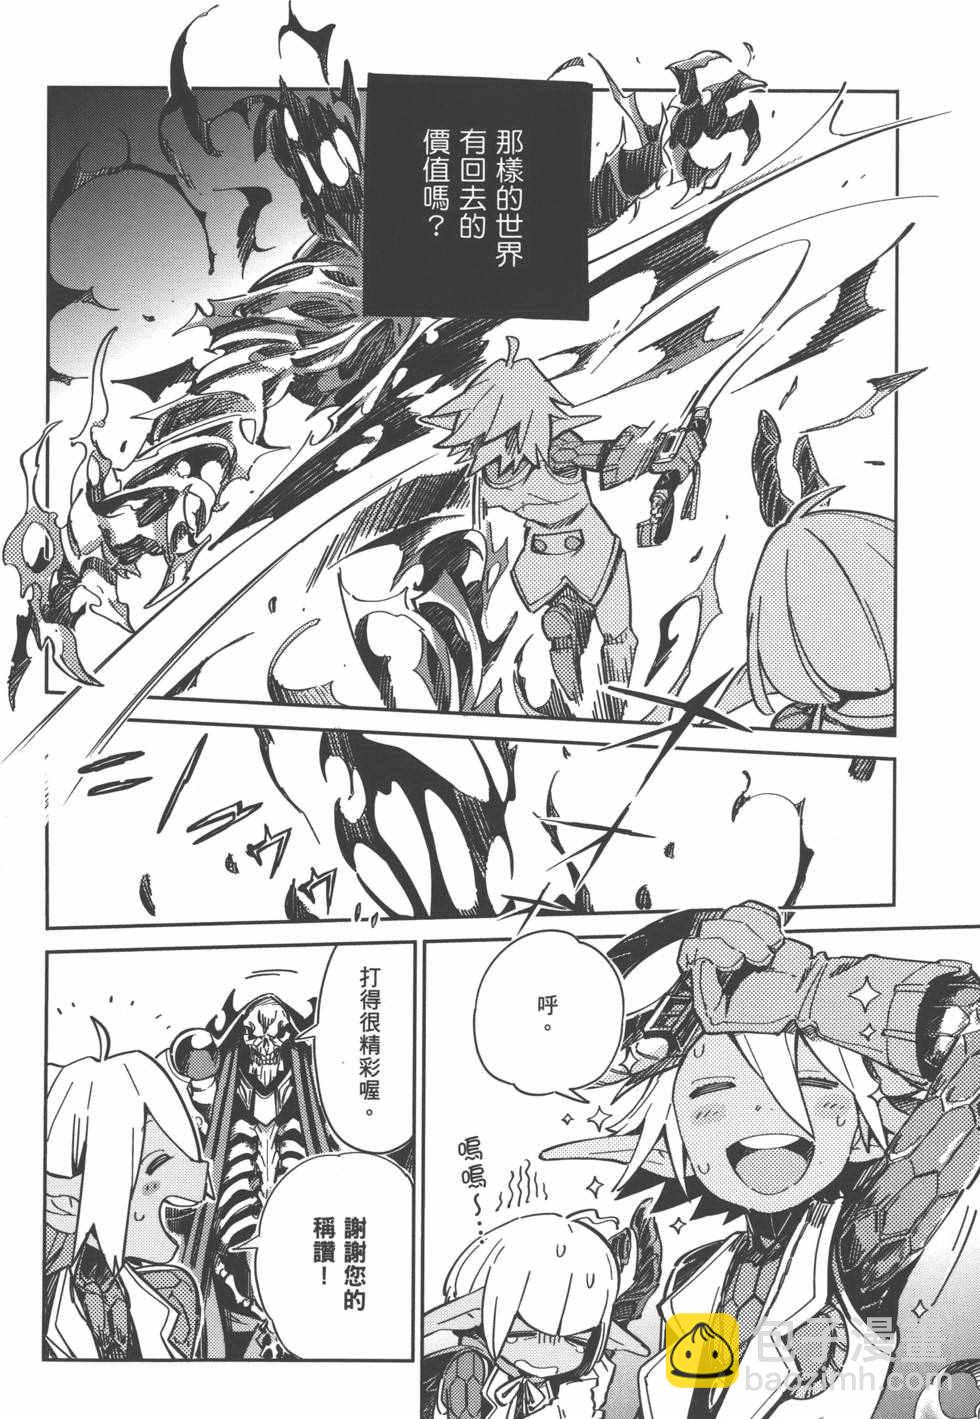 OVERLORD - 第1卷(1/4) - 8